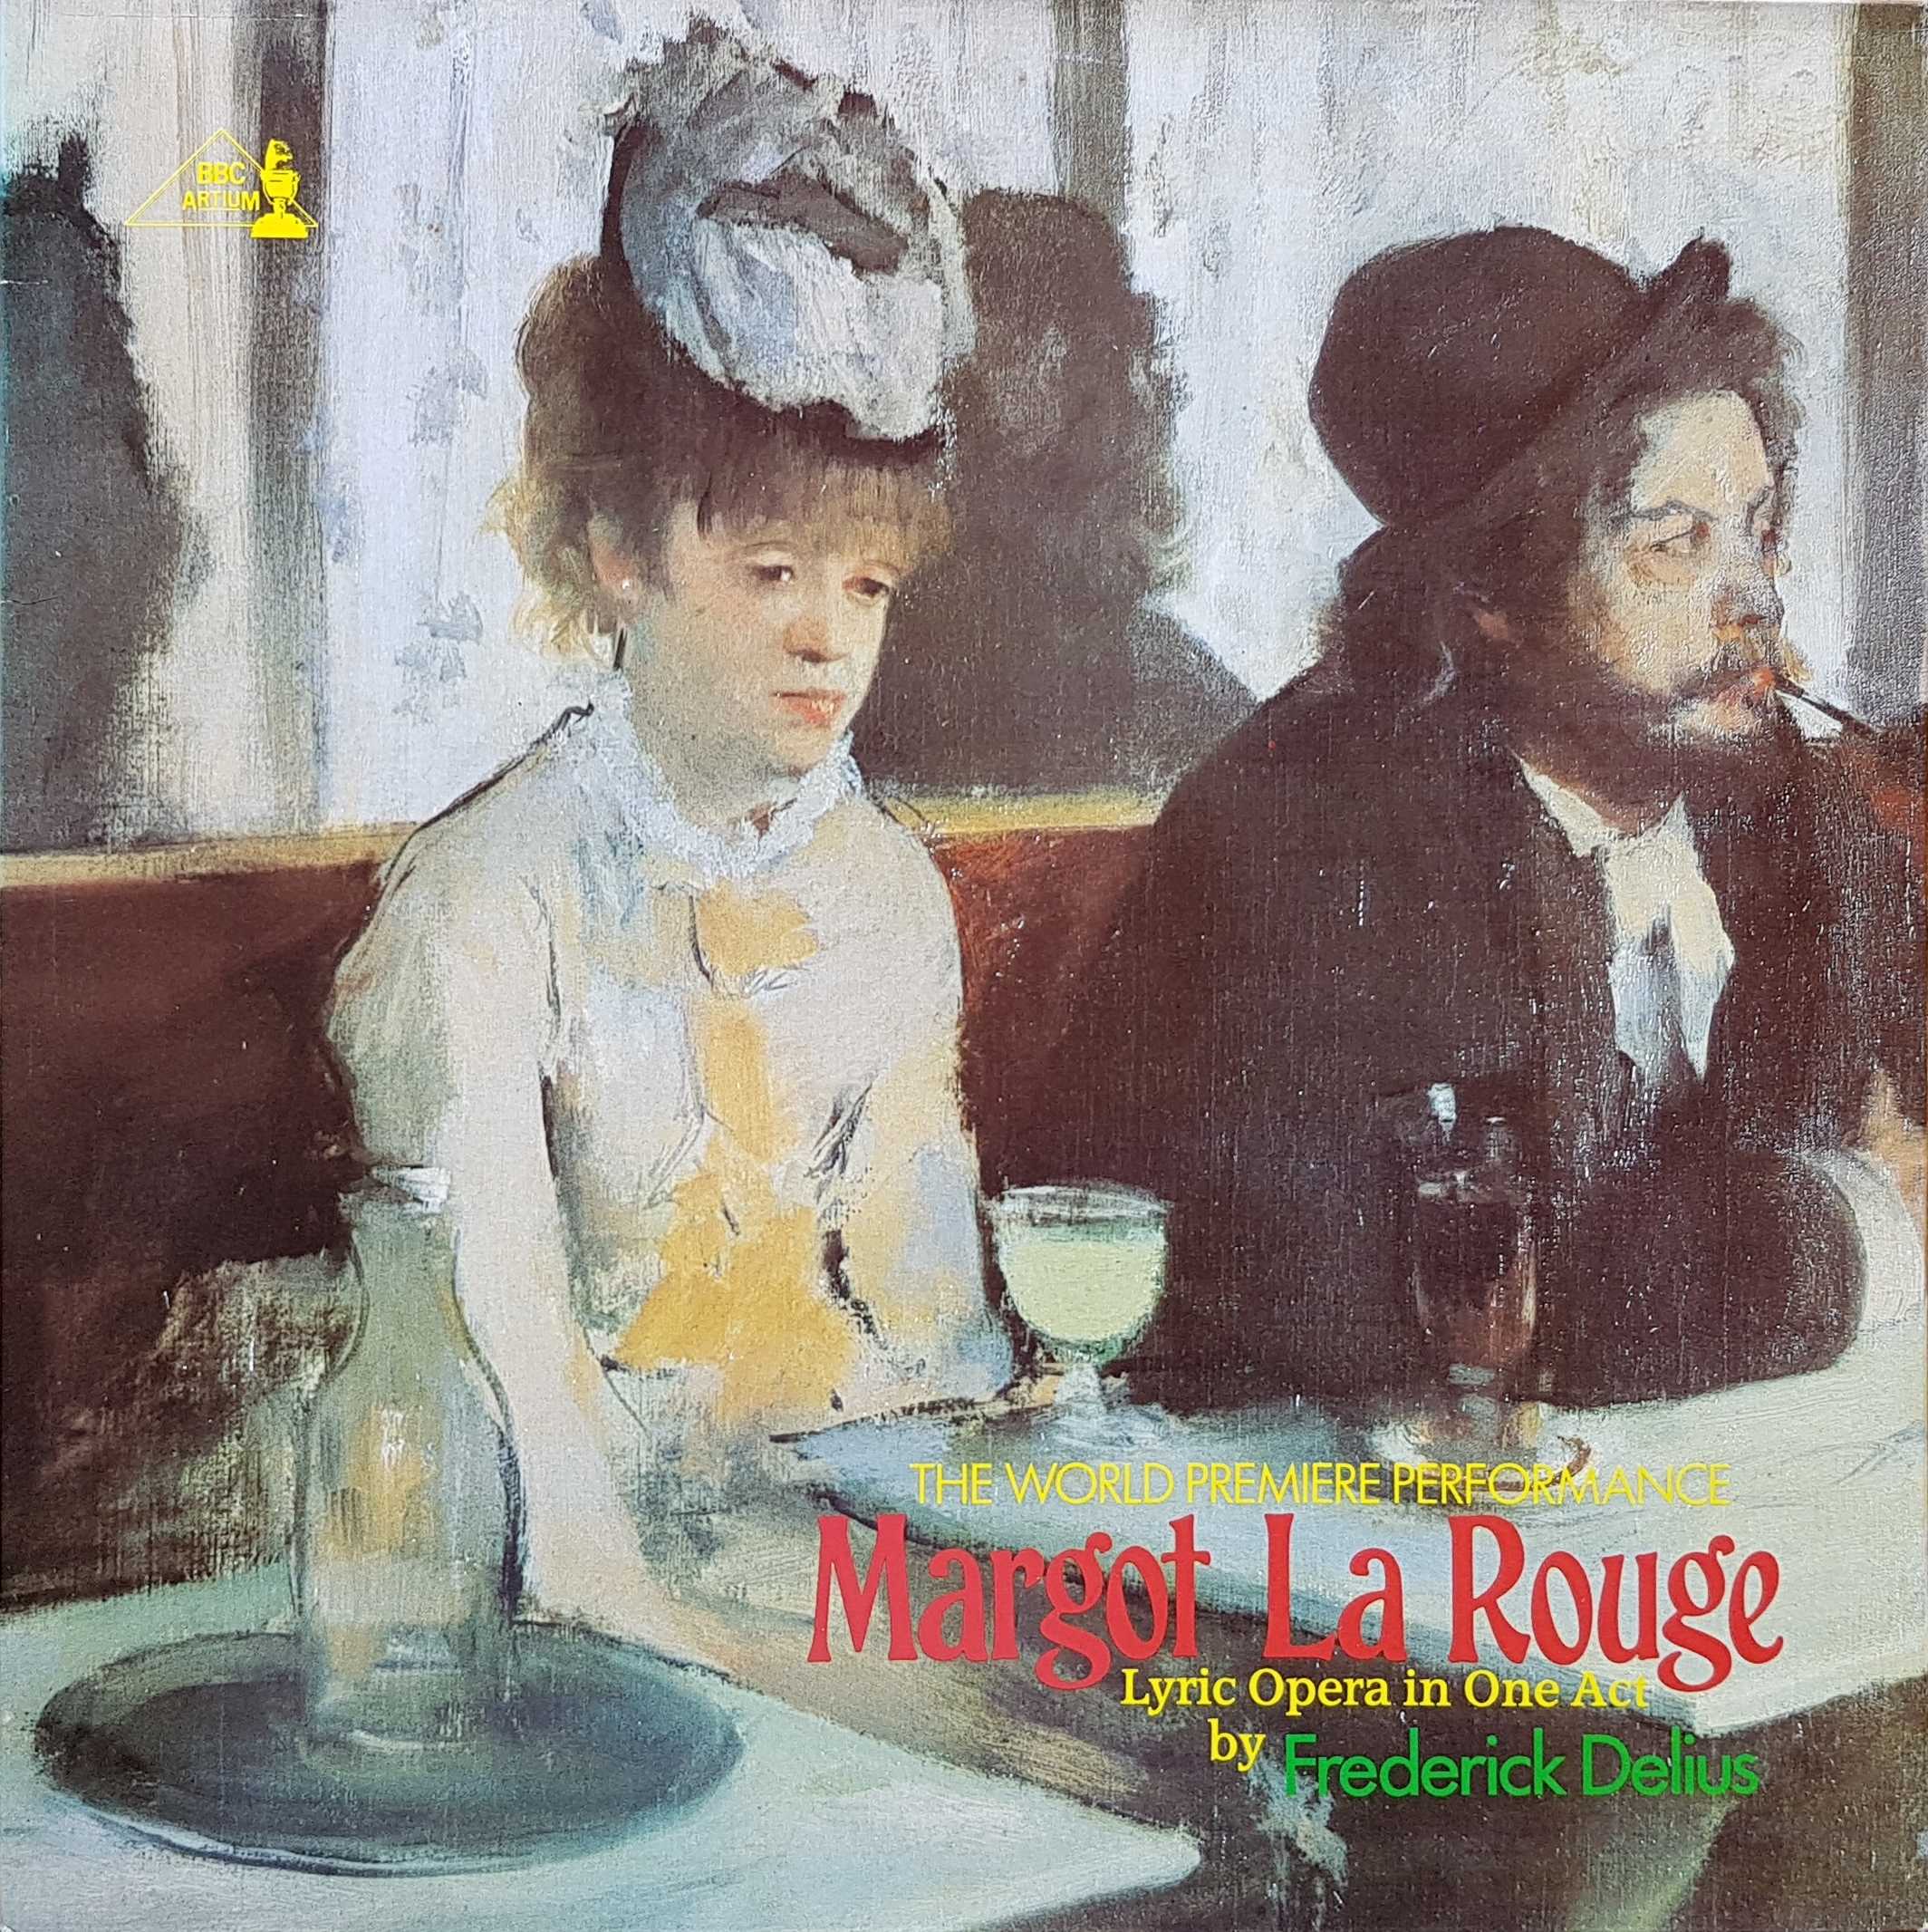 Picture of REGL 458 The magic fountain / Margot La Rouge by artist Margot La Rouge from the BBC albums - Records and Tapes library